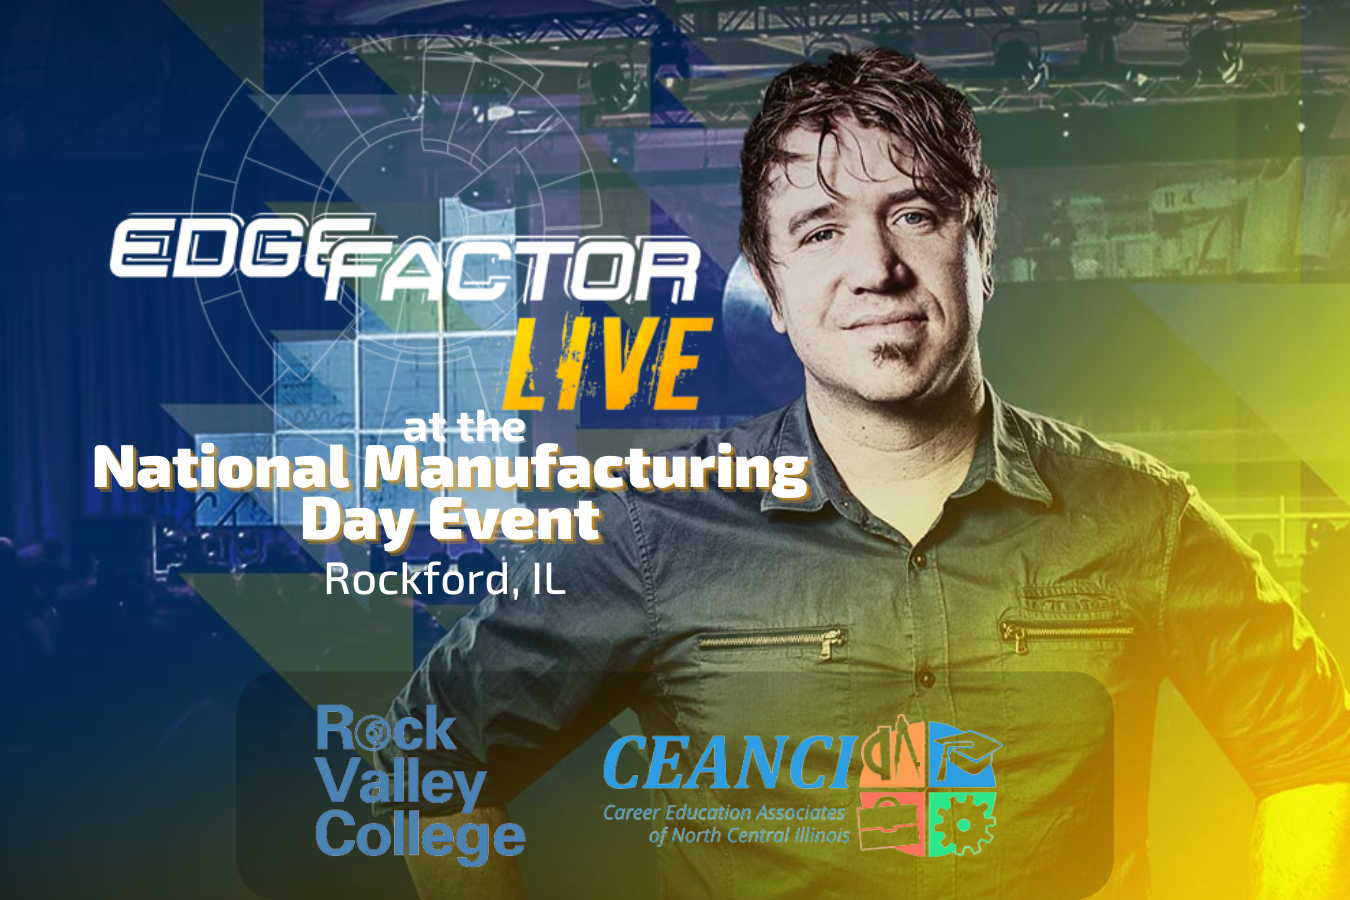 Jeremy Bout Keynote presenter at National Manufacturing Day event at Rock Valley College